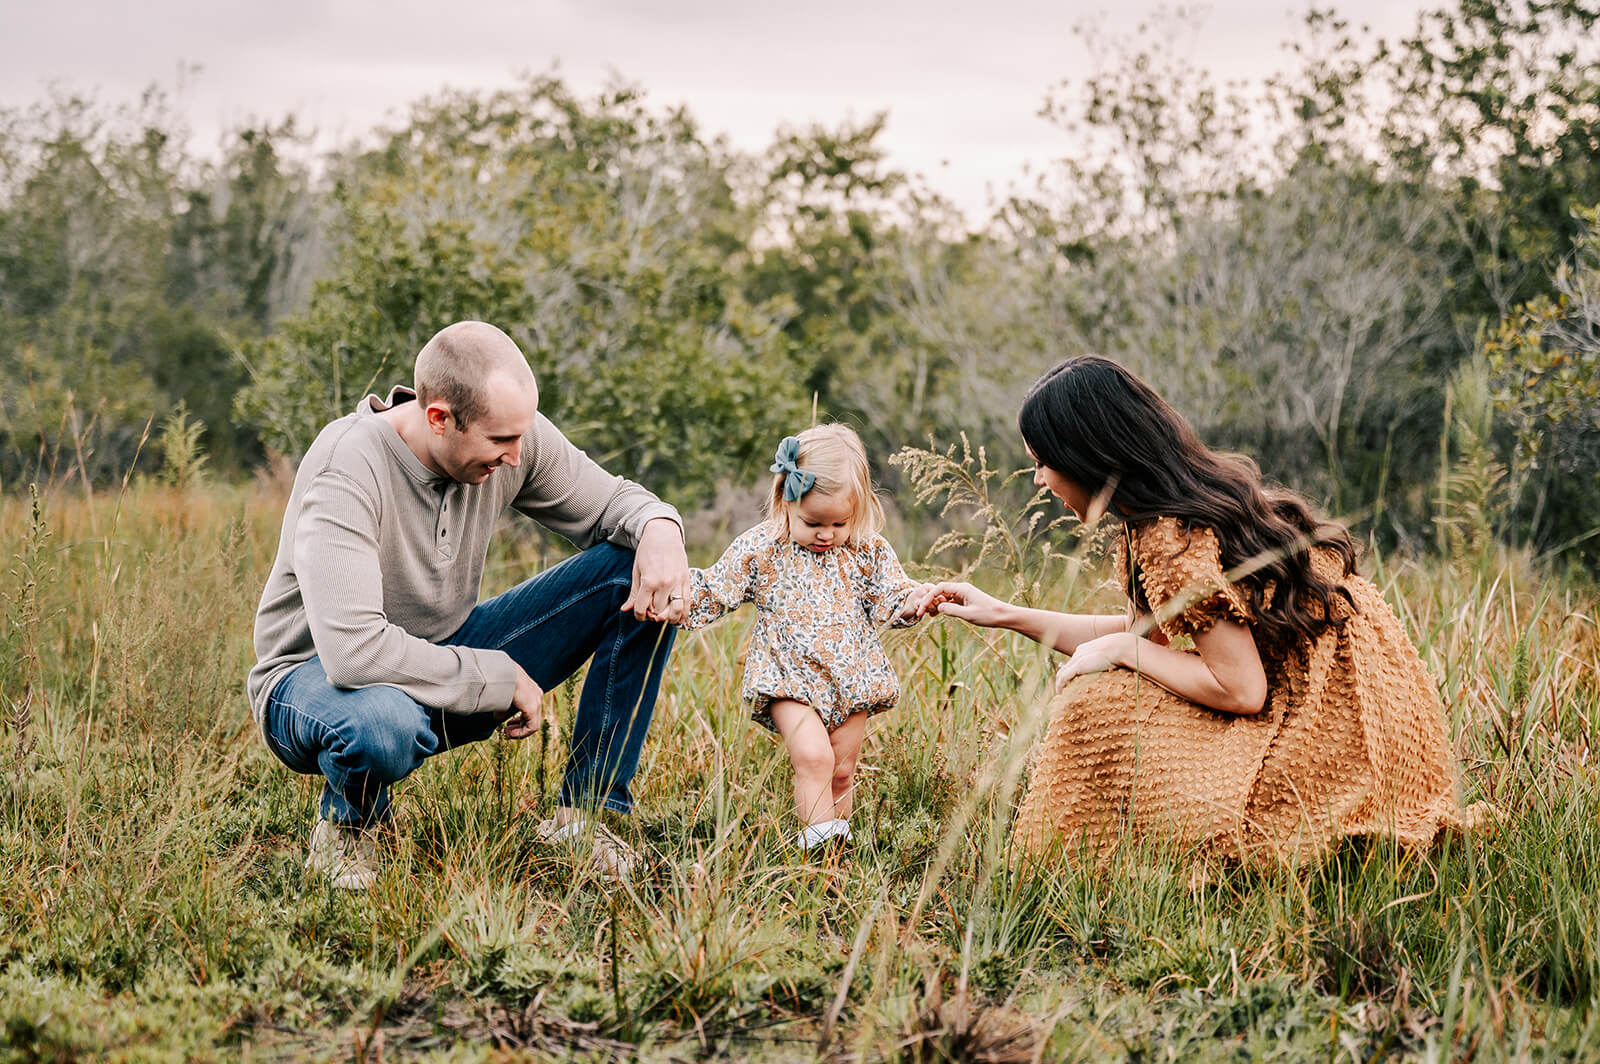 A mom and dad explore a grassy forest field with their toddler daughter